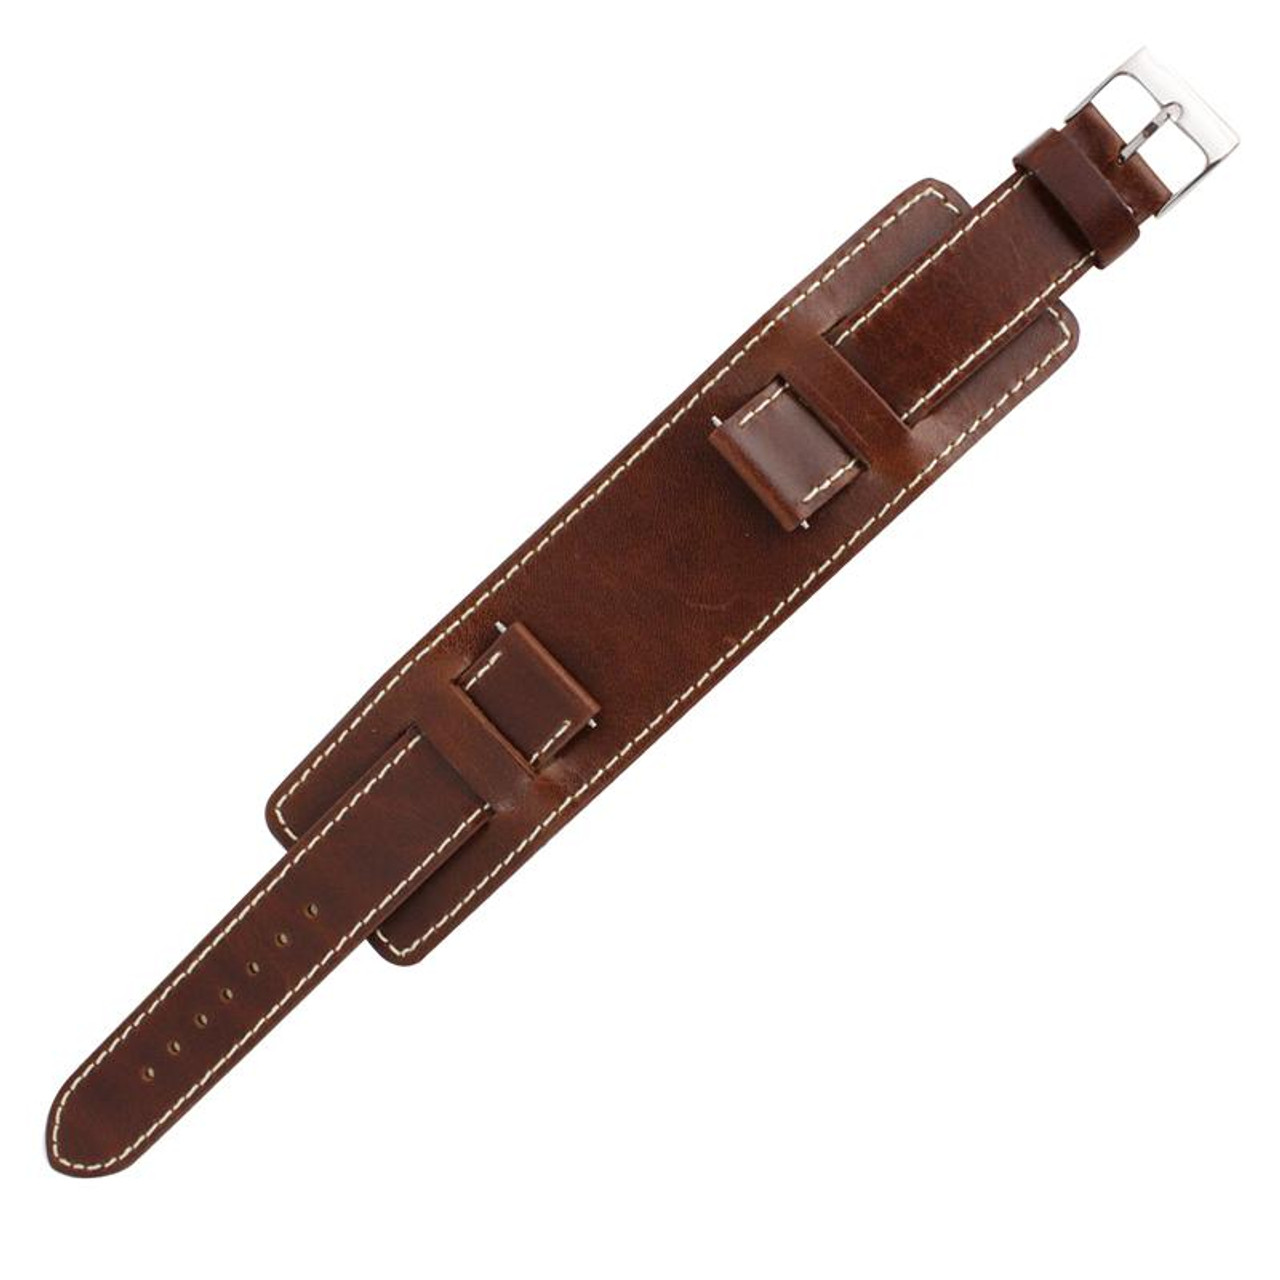 Brown leather Watch Band Wide Leather Strap 20mm 7 1/2 Inch Length - Watch Straps | Esslinger